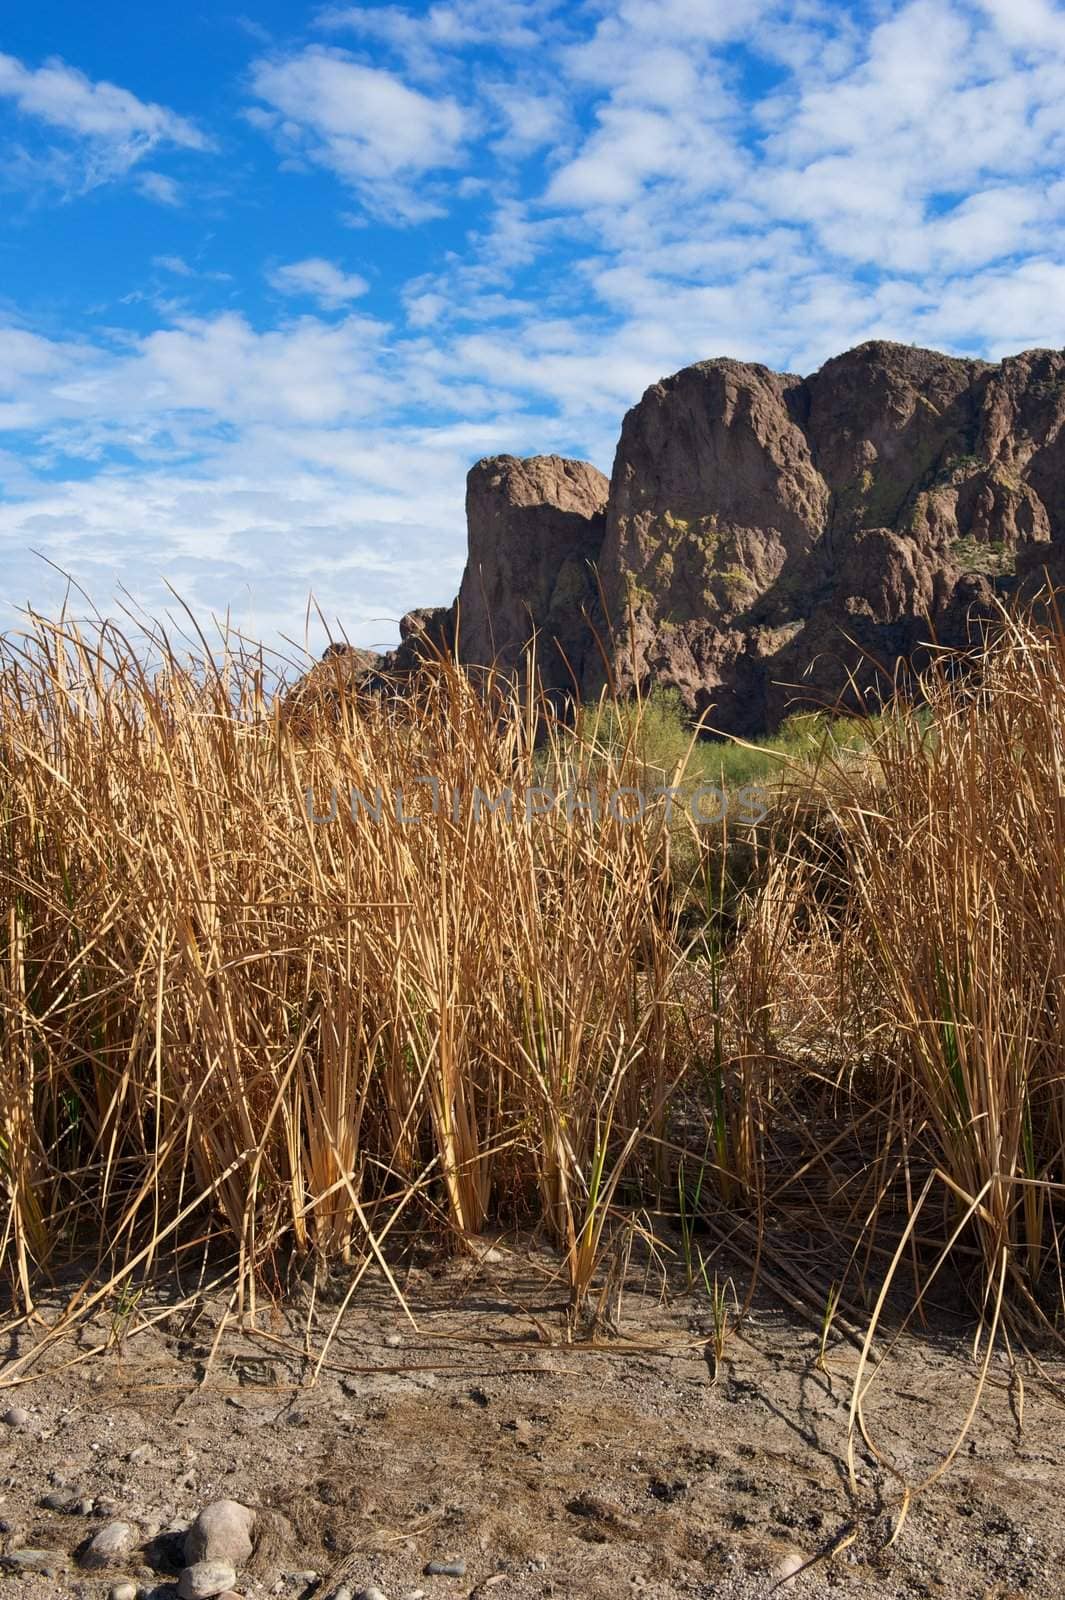 Tall Grass in front of Desert Mountains and Blue Sky by pixelsnap